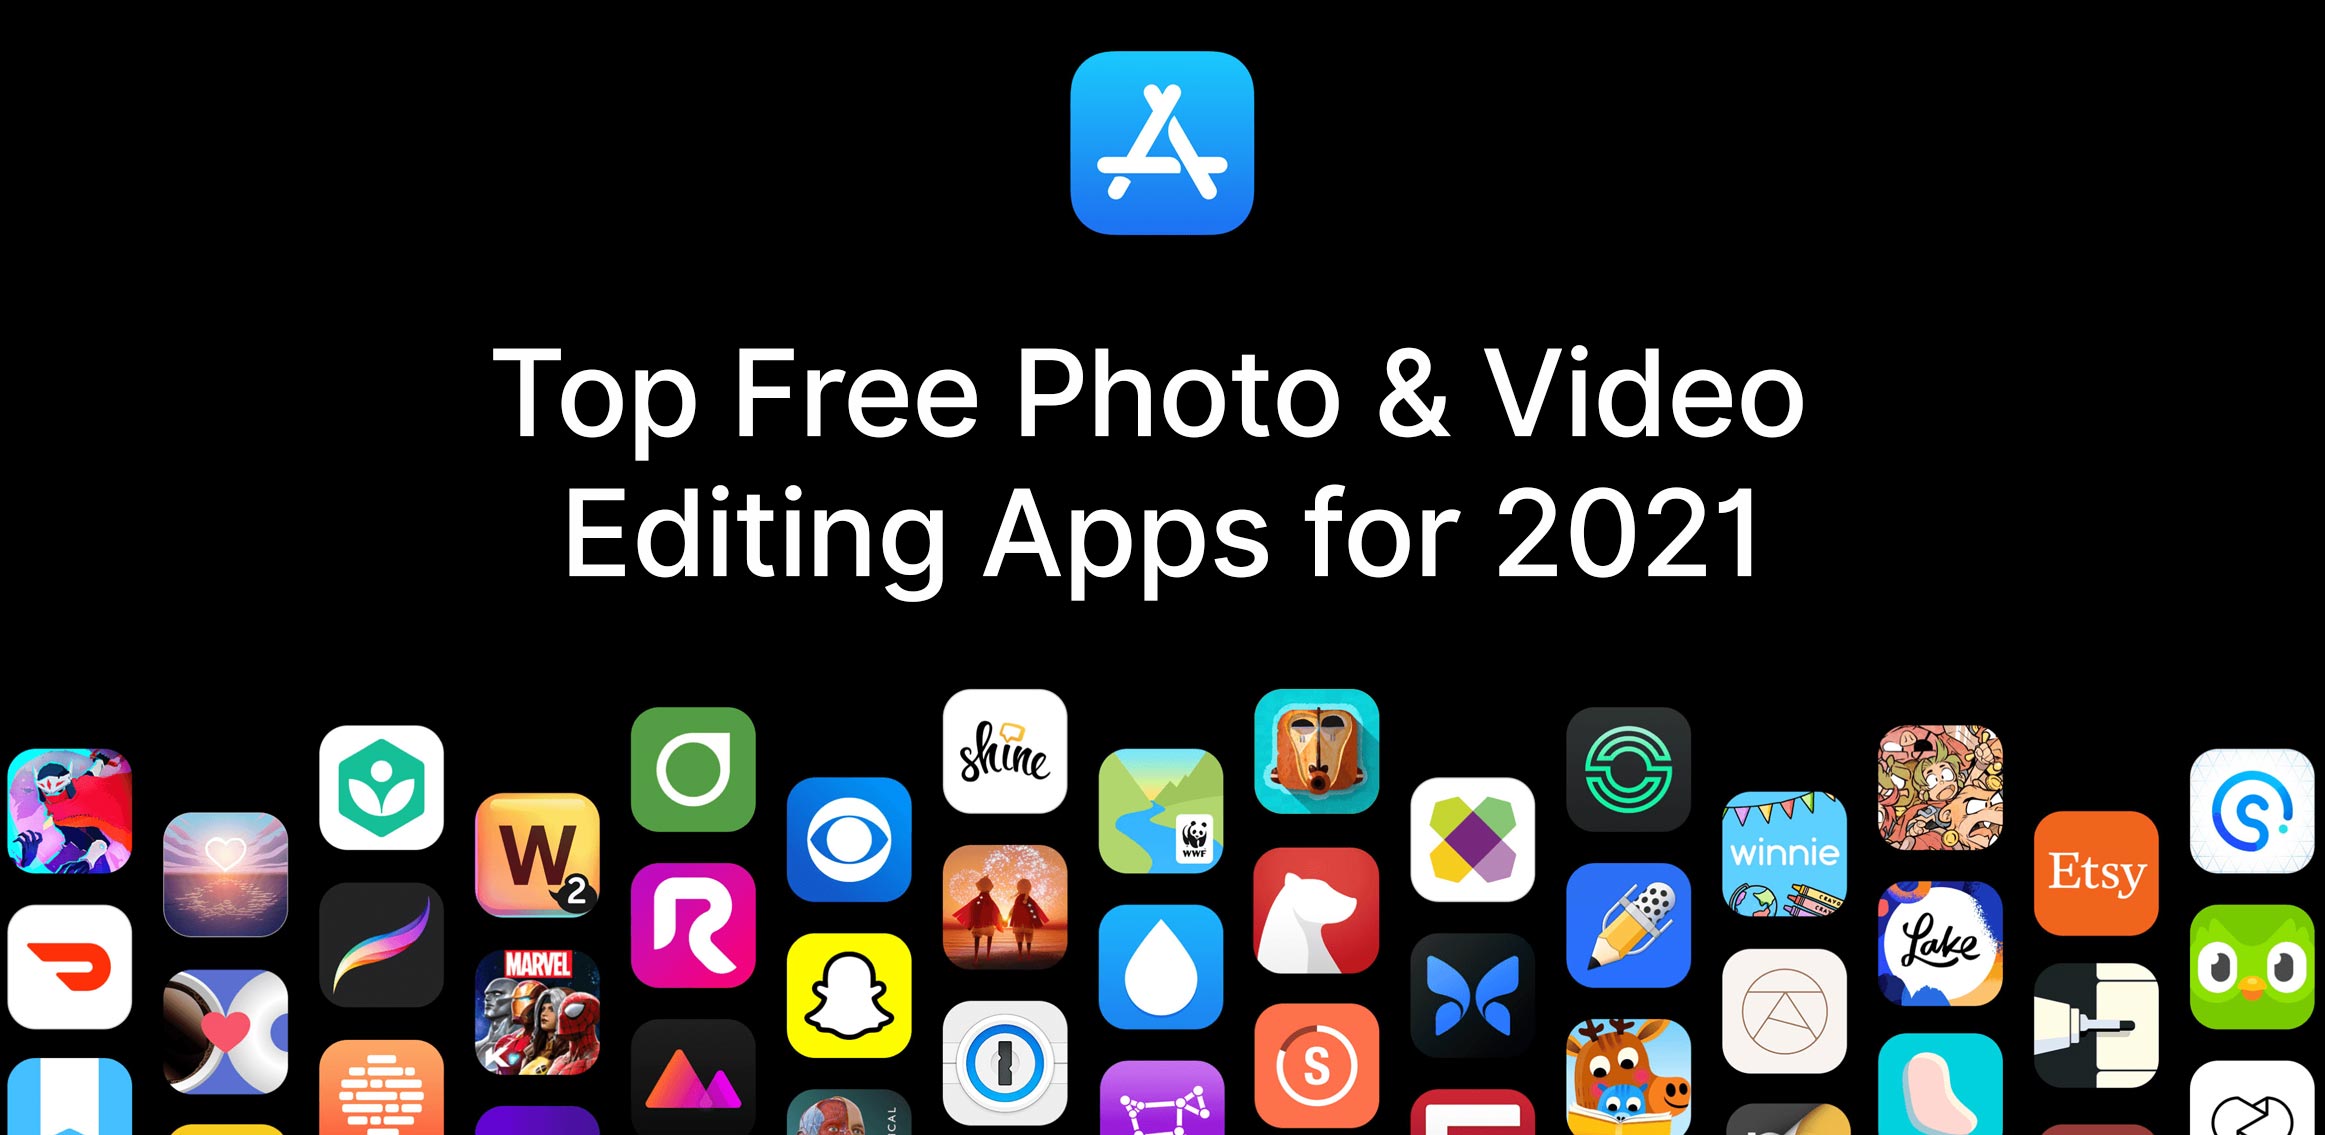 Article about Top Free Photo & Video Editing Apps for 2021